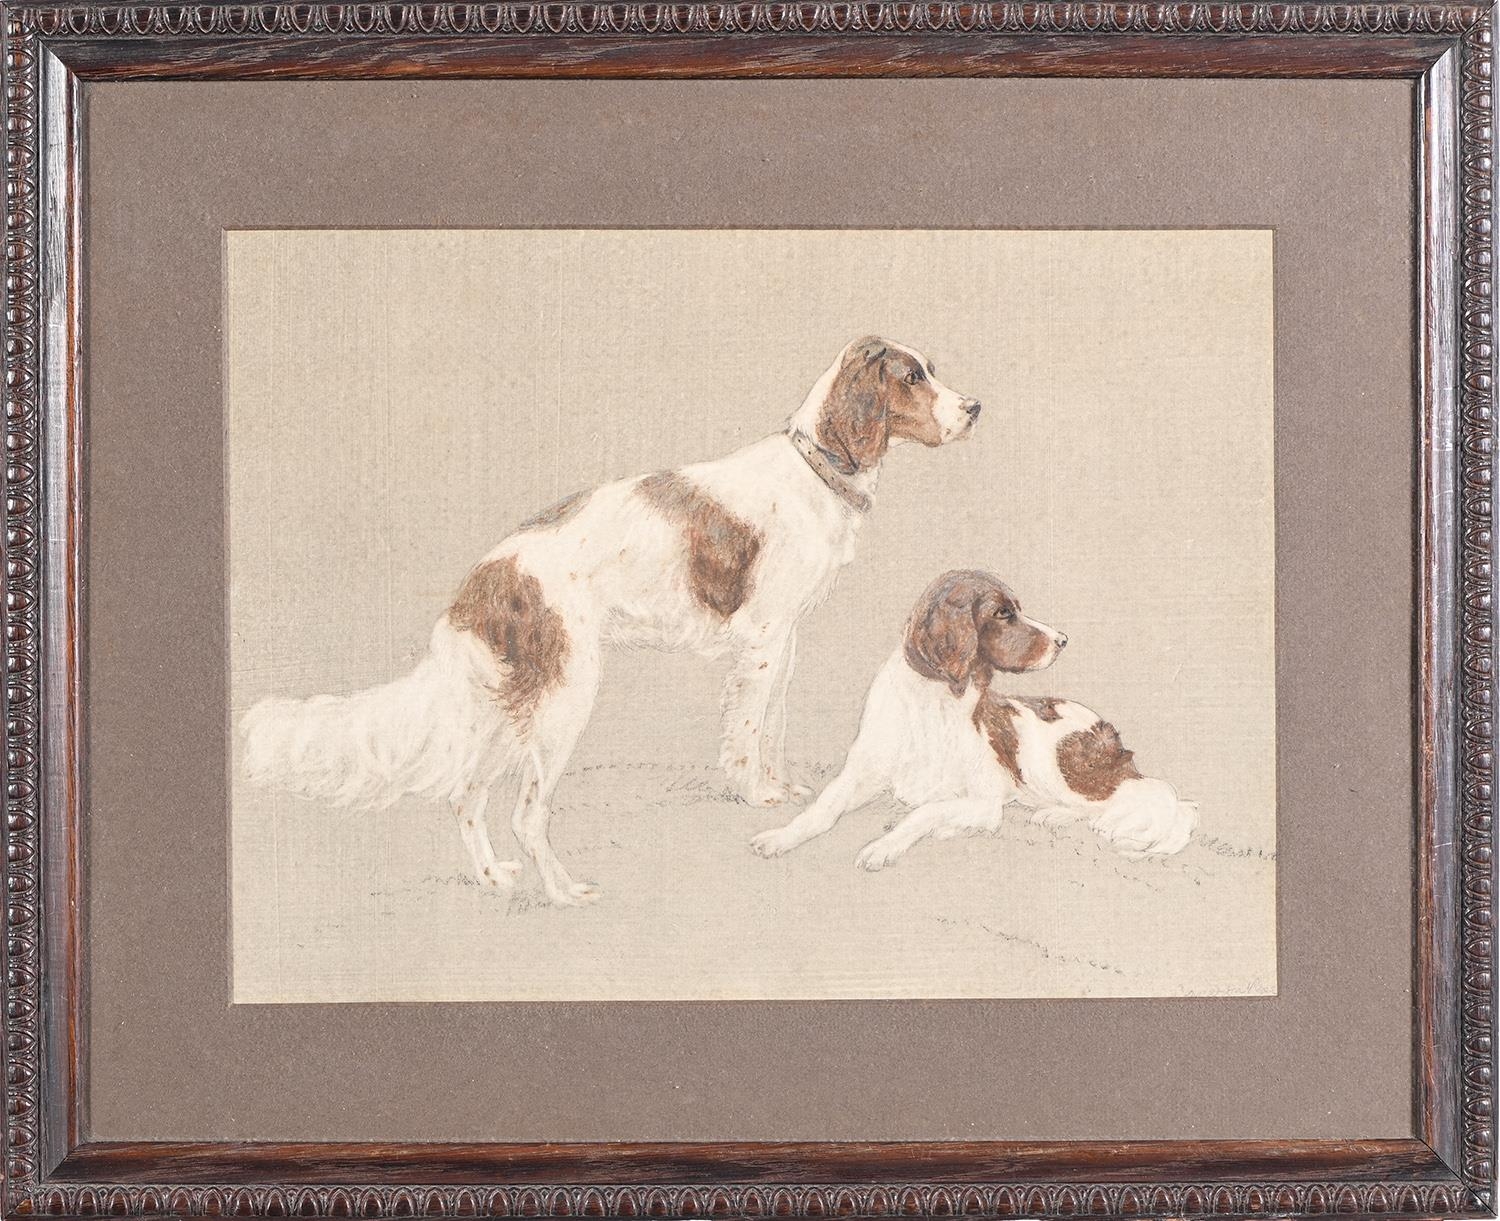 Hugh Adam Cameron-Rose (1909-1937) - Portraits of Spaniels and a Terrier, a set of three, all - Image 2 of 8